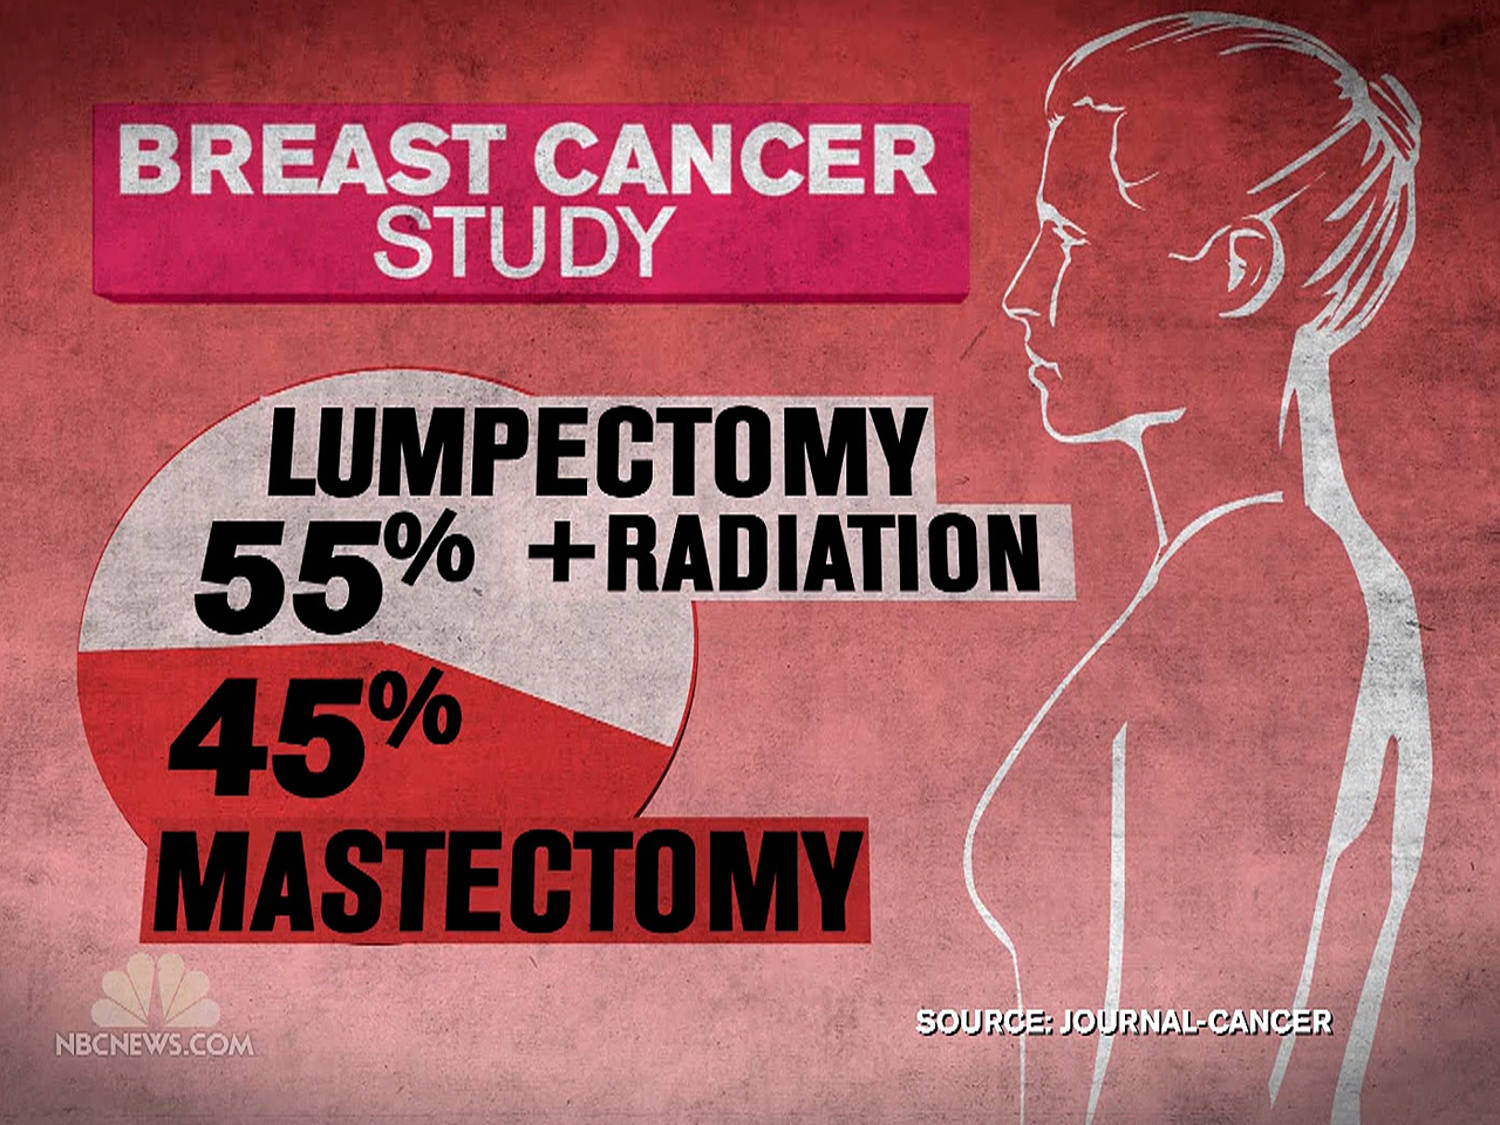 Pin on Mastectomy Resources